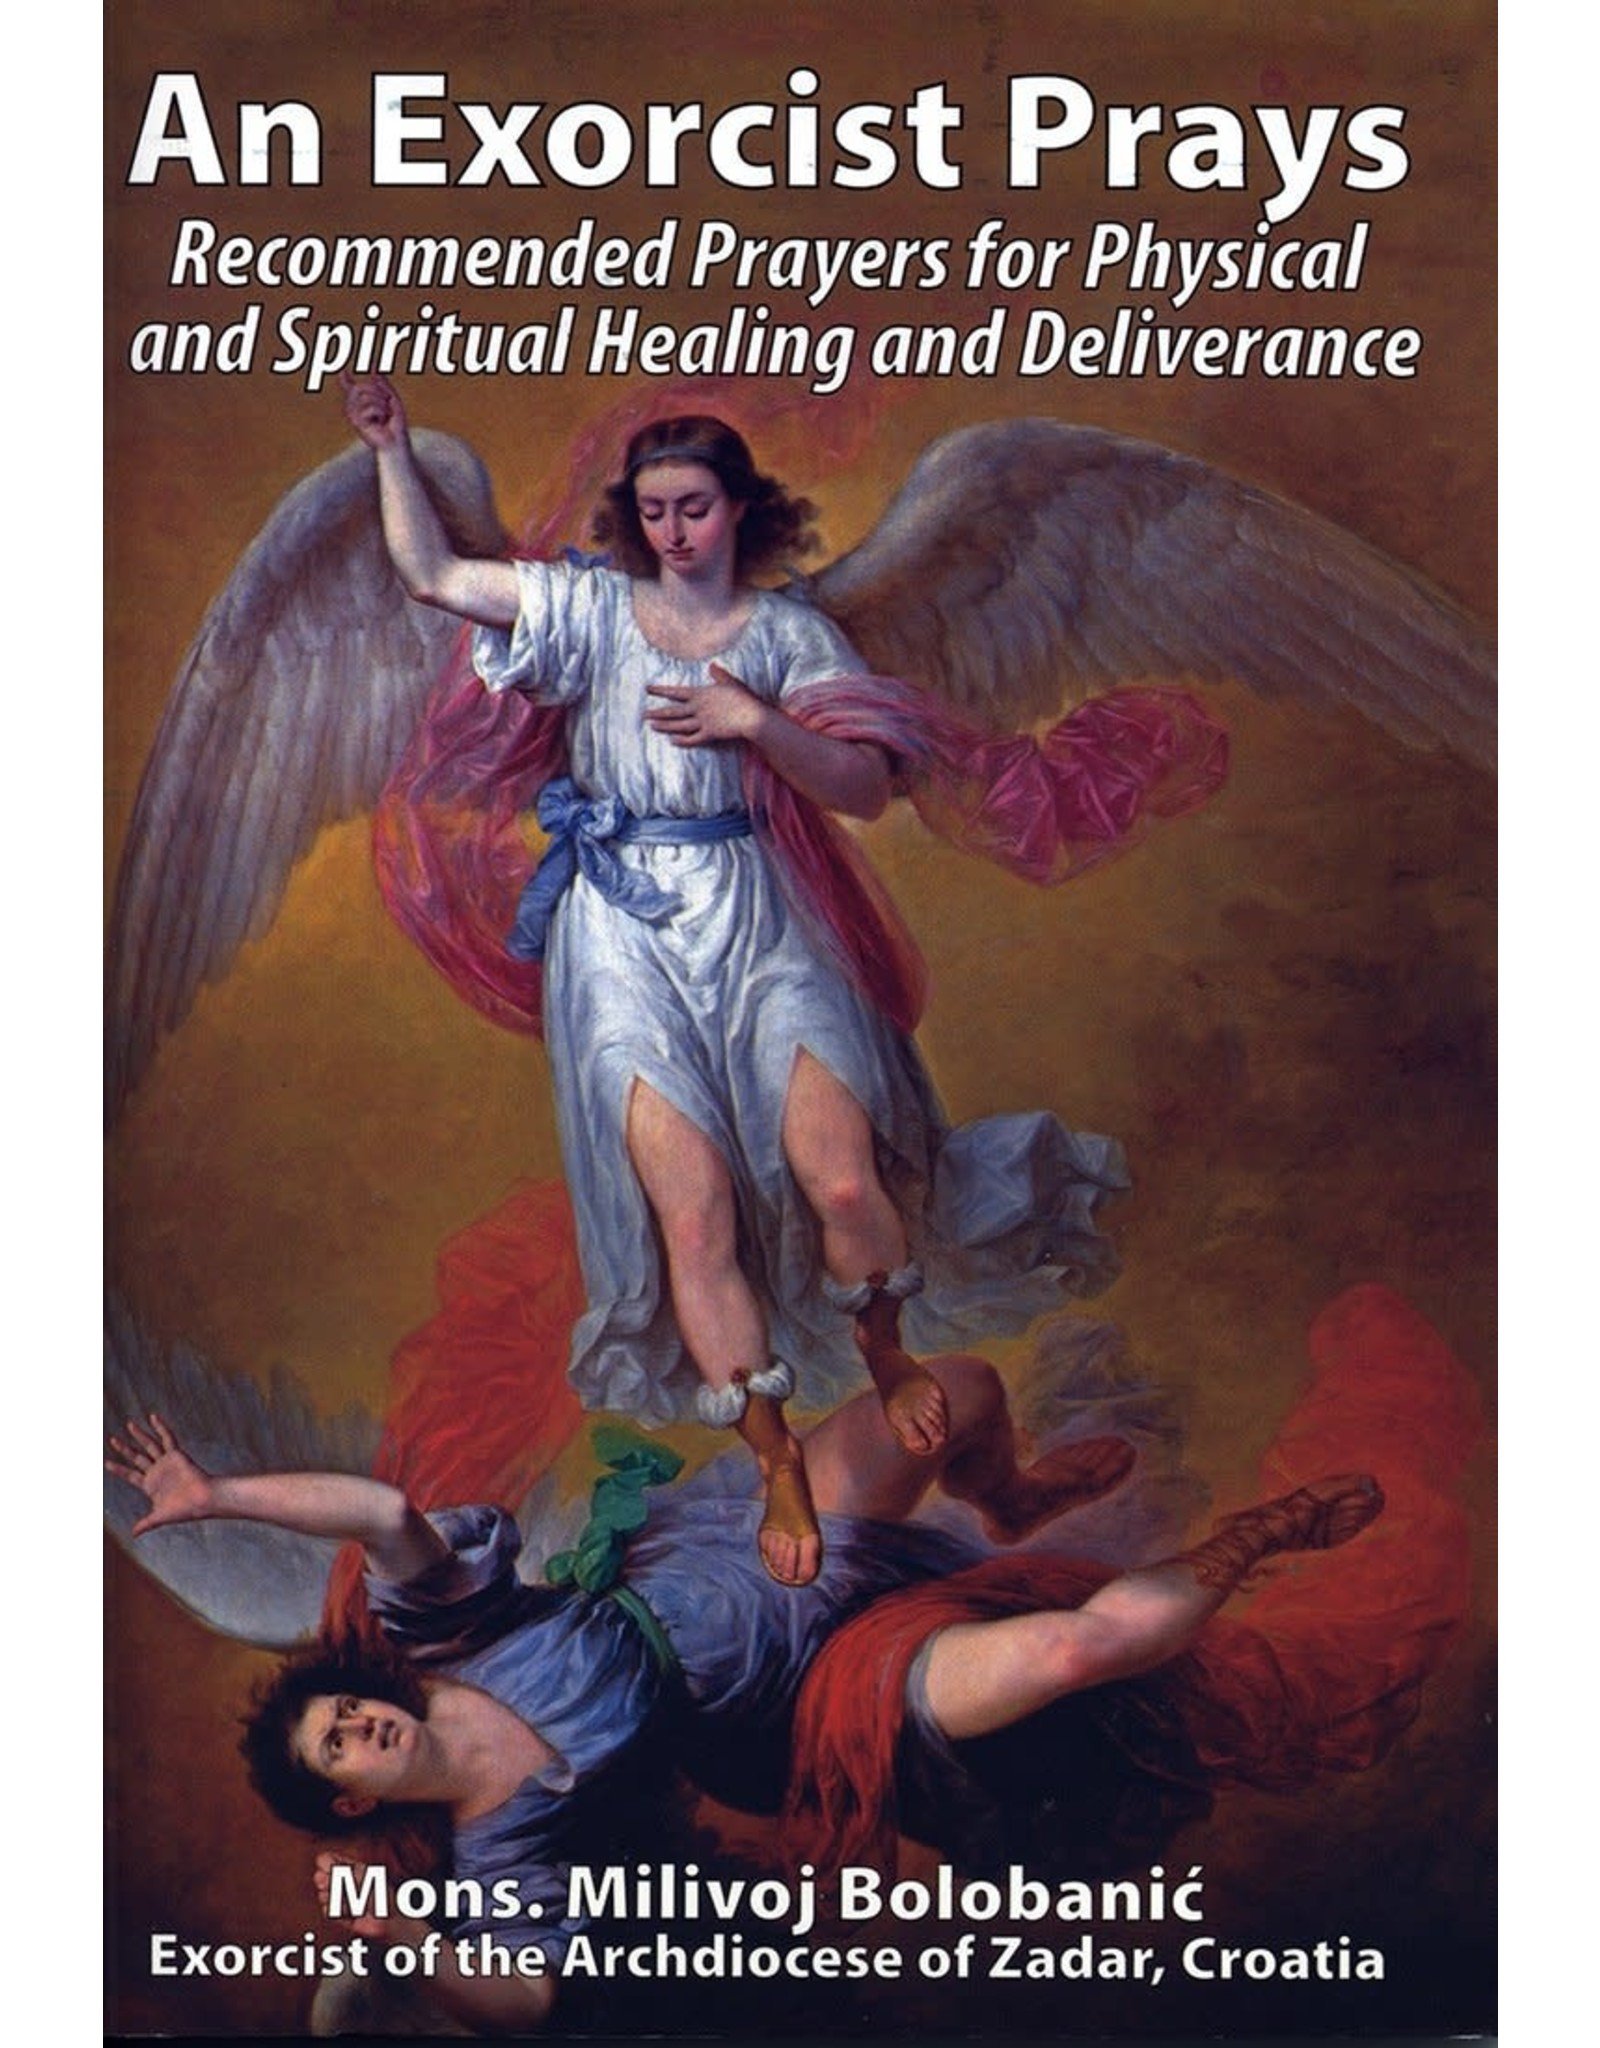 Oremus Mercy An Exorcist Prays: Recommended Prayers for Physical and Spiritual Healing and Deliverance by Mons. Milivoj Bolobanic; Exorcist of the Archdiocese of Zadar, Croatia (Paperback)